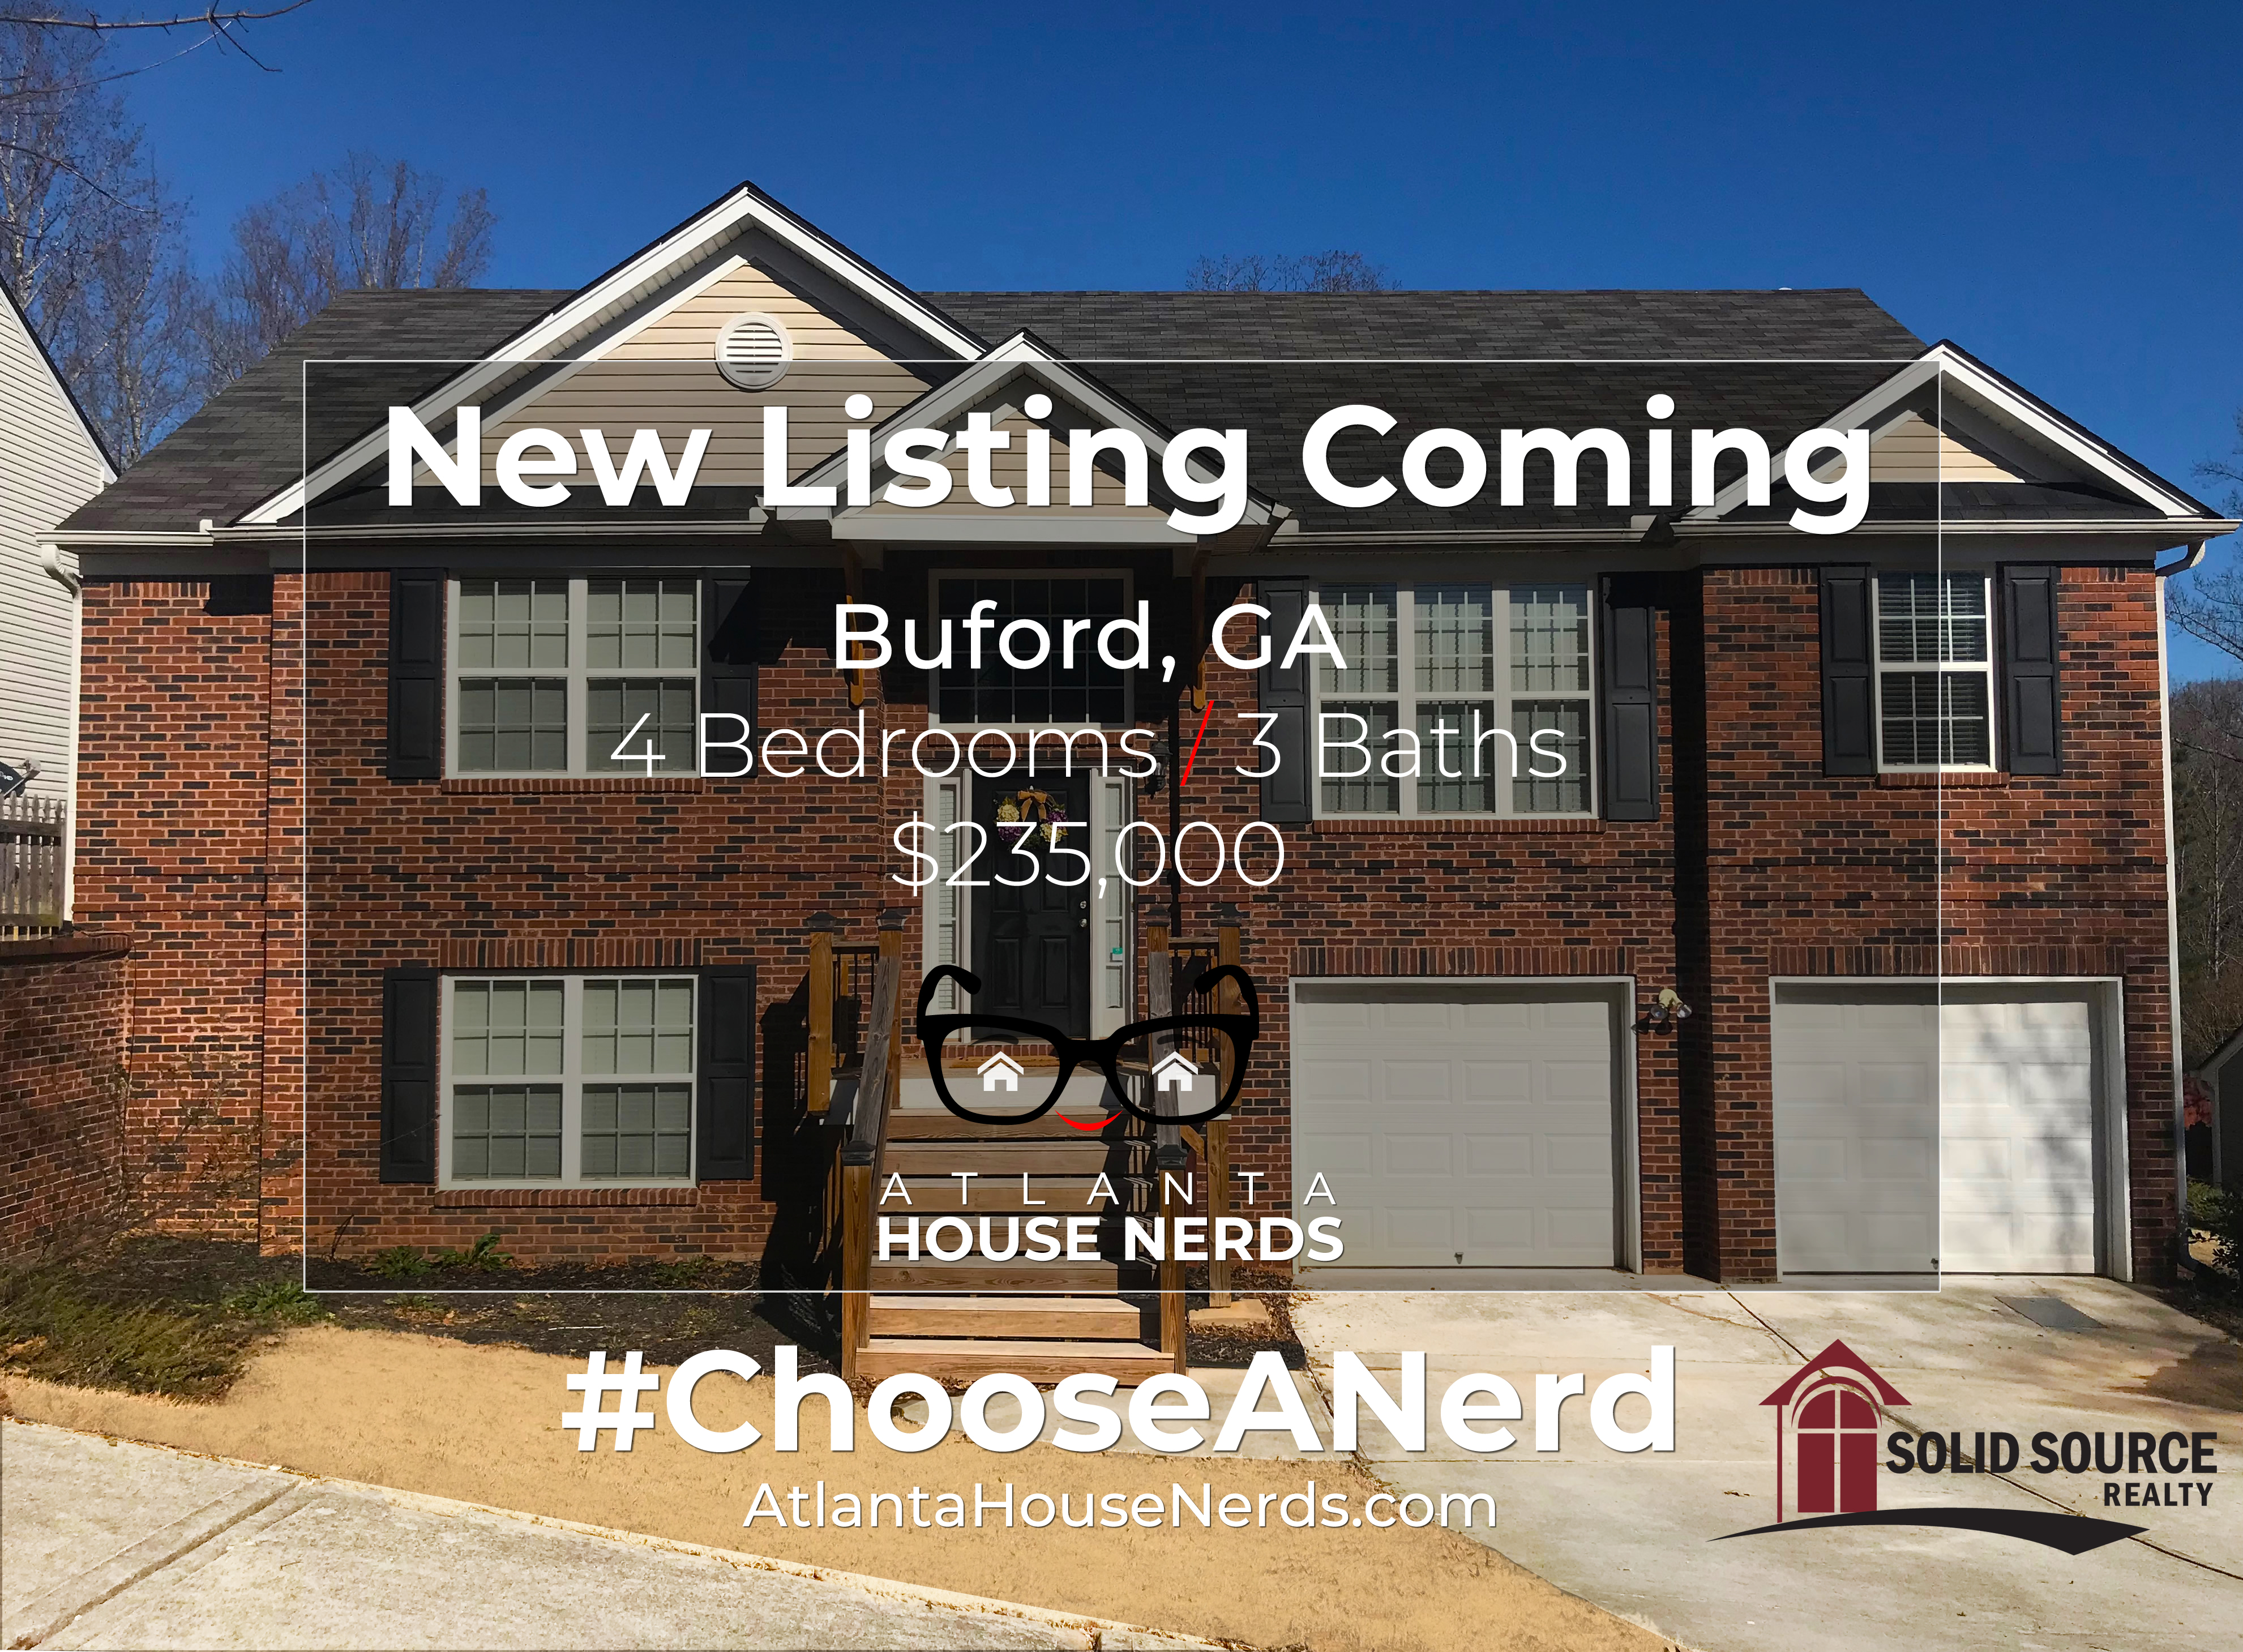 Hey Buyers: New 4Bd, 3Ba in Buford, GA Coming On the Market for $235,000